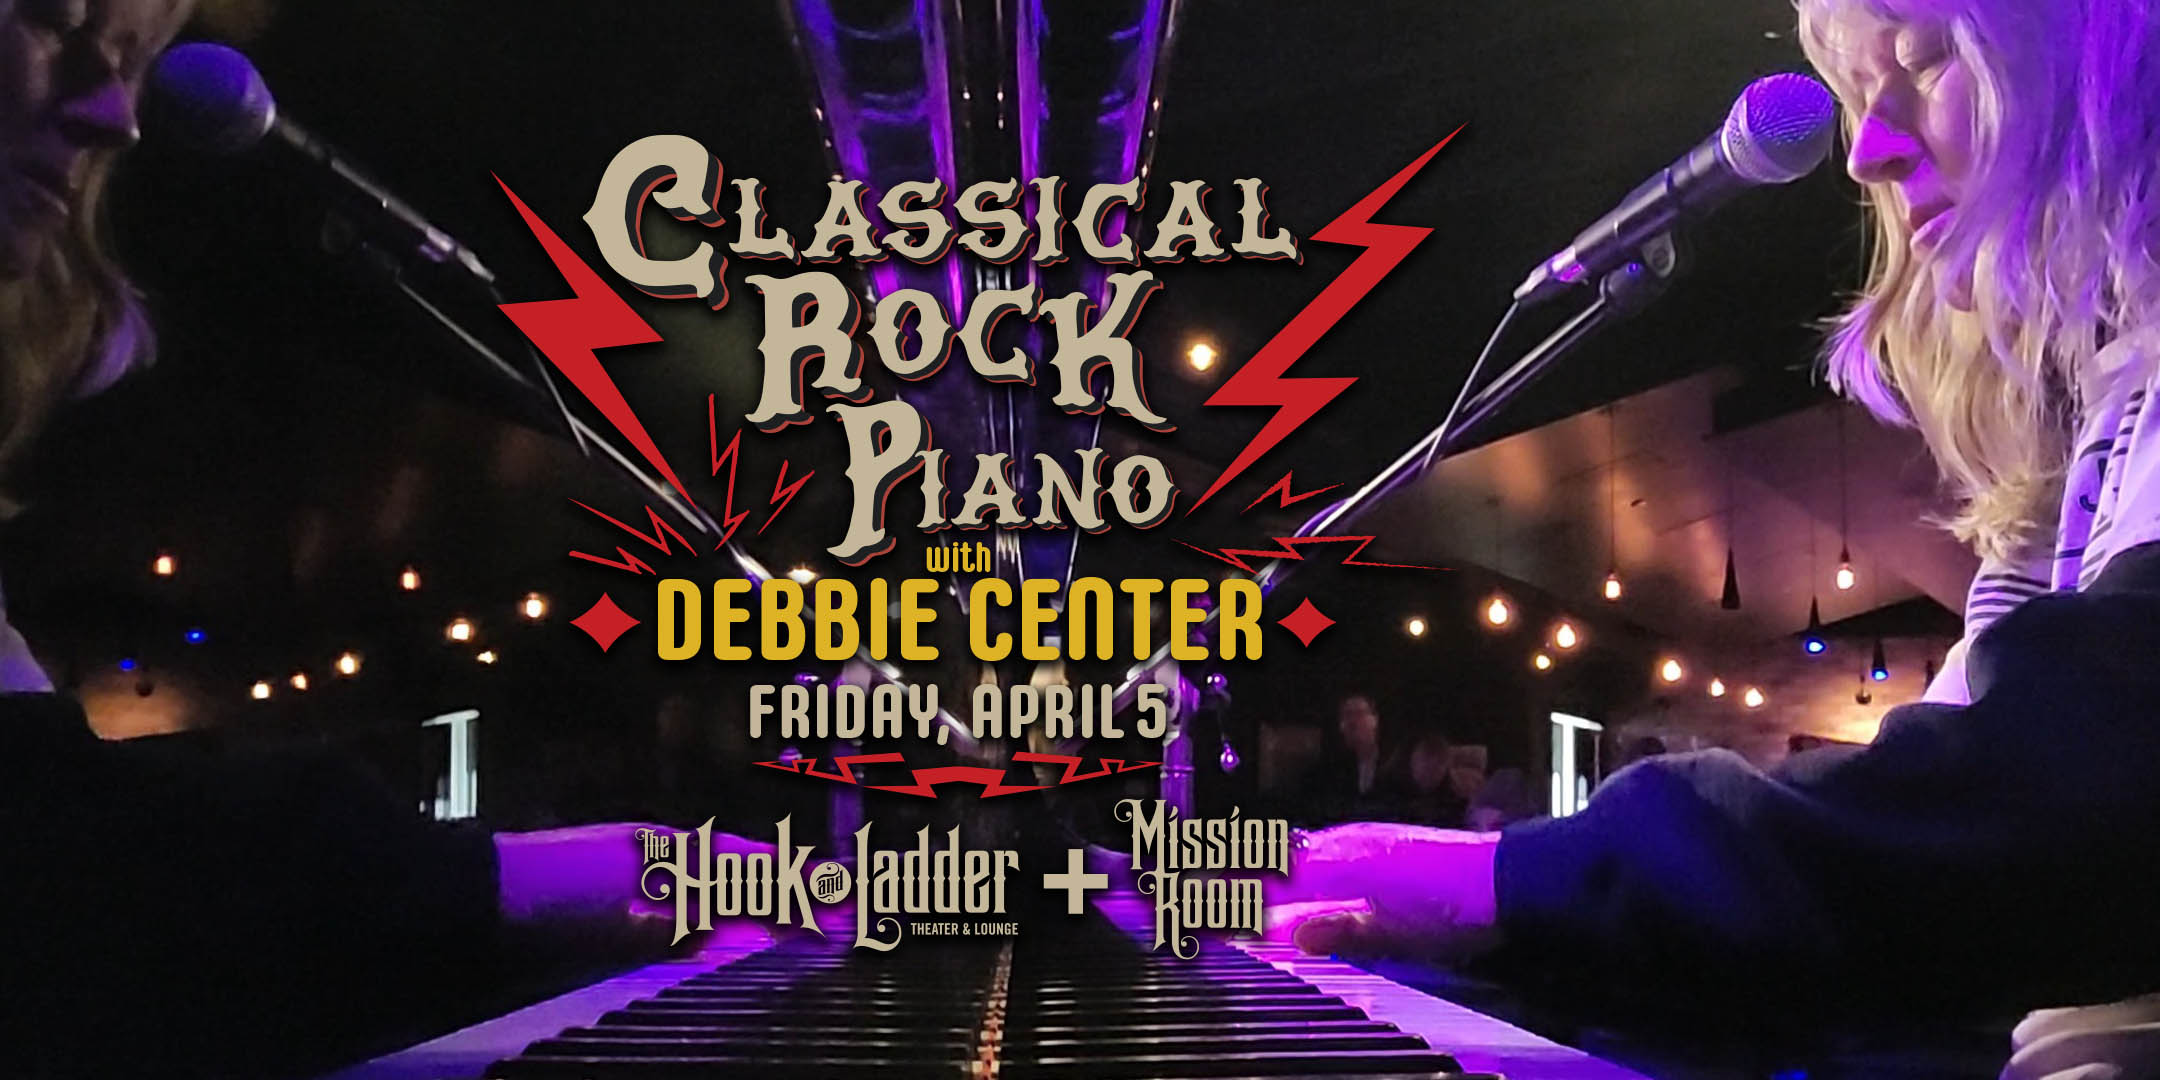 'Classical Rock Piano' An Evening with Debbie Center 1st Set Classic Rock / 2nd Set Grateful Dead Friday, April 5 The Mission Room at The Hook Doors 6:30pm :: Music 7:30pm $15 ADV / $20 DOS